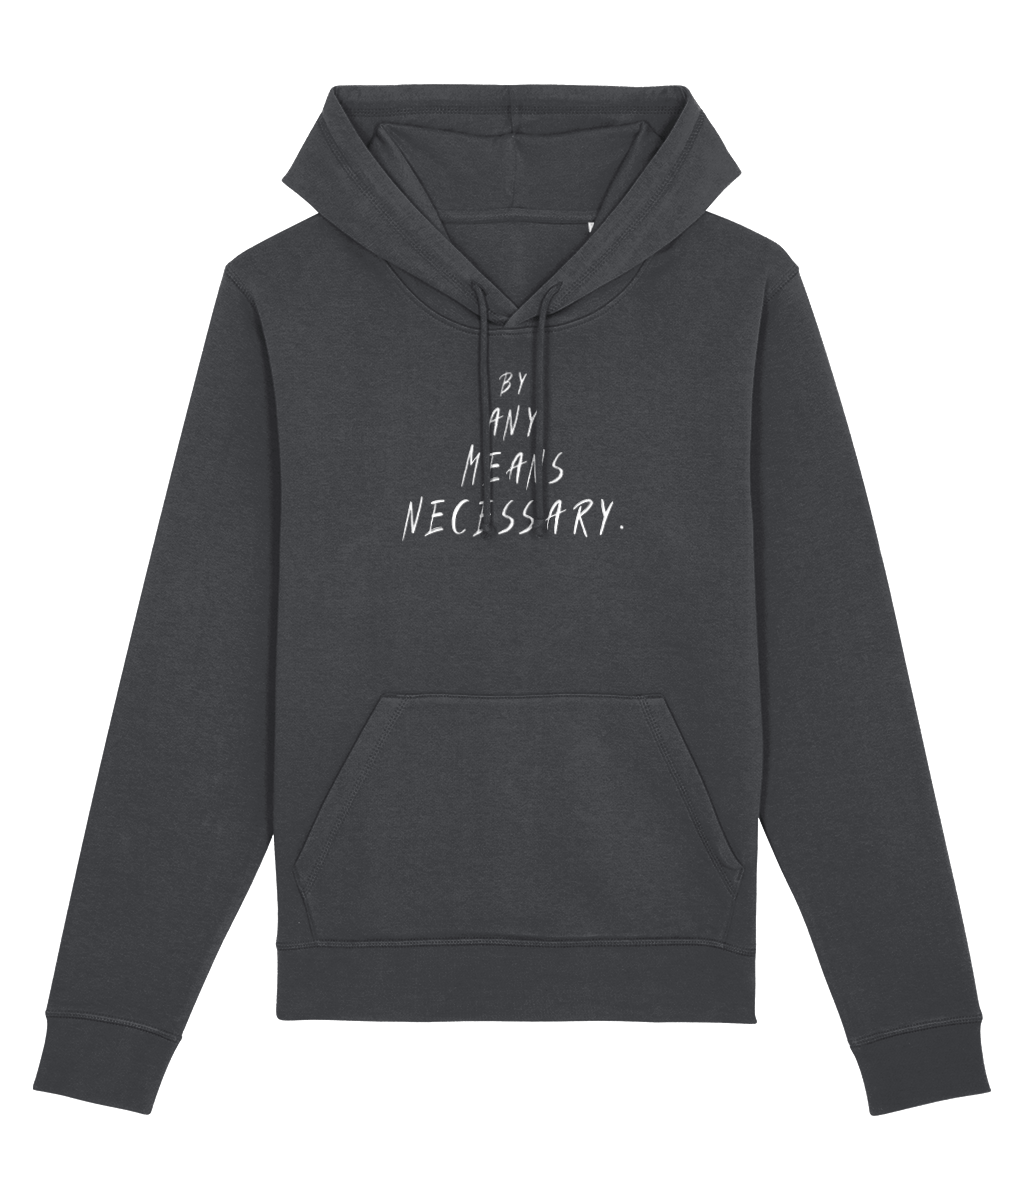 Malcolm X 'By Any Means Necessary' Organic Cotton Hoodie - Cool Hoodie